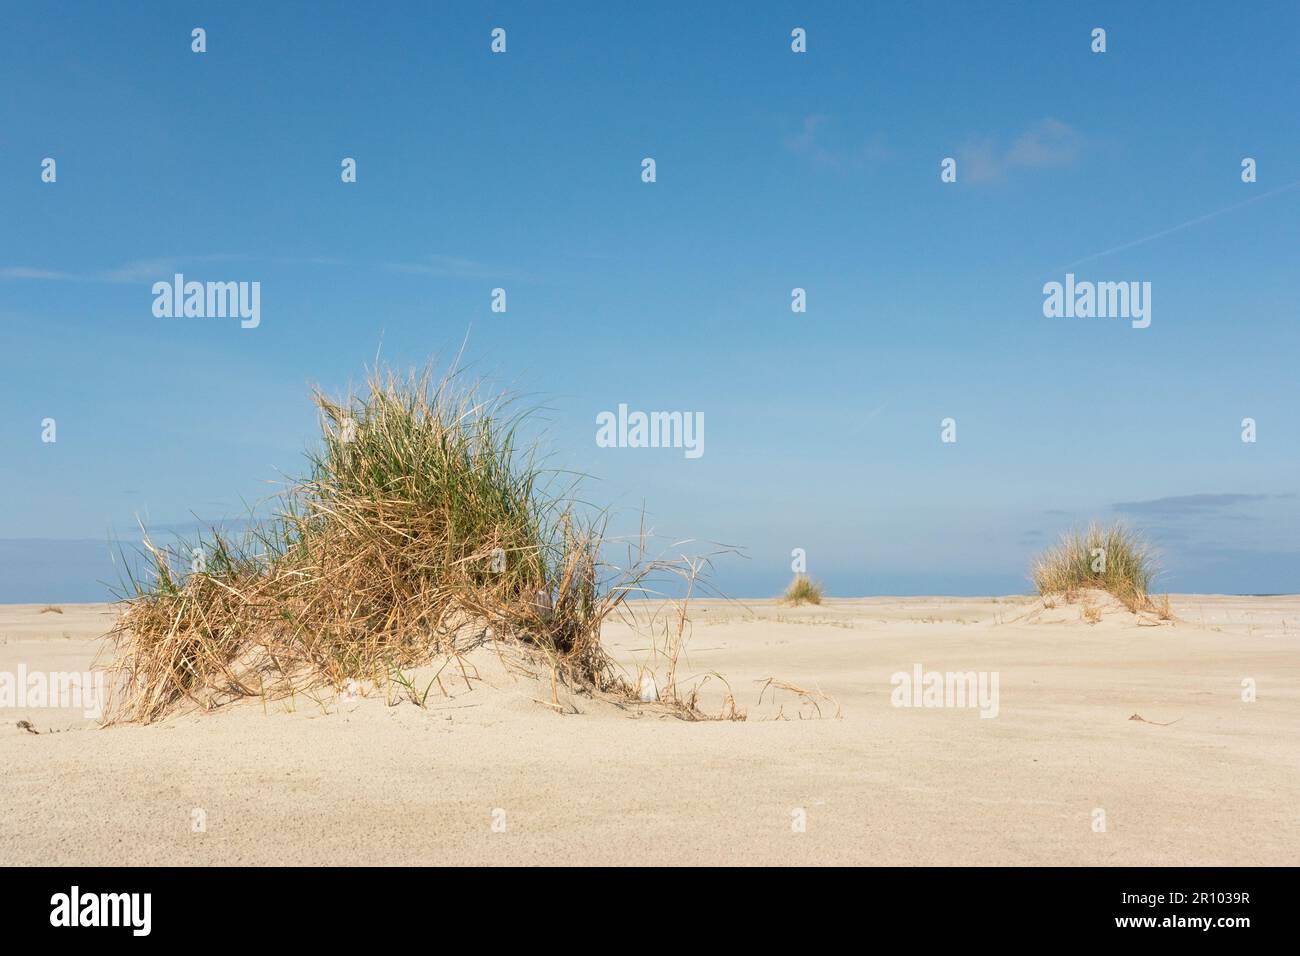 Dune forming on a beach: Marram grass catches sand and forms embryonic dunes Stock Photo